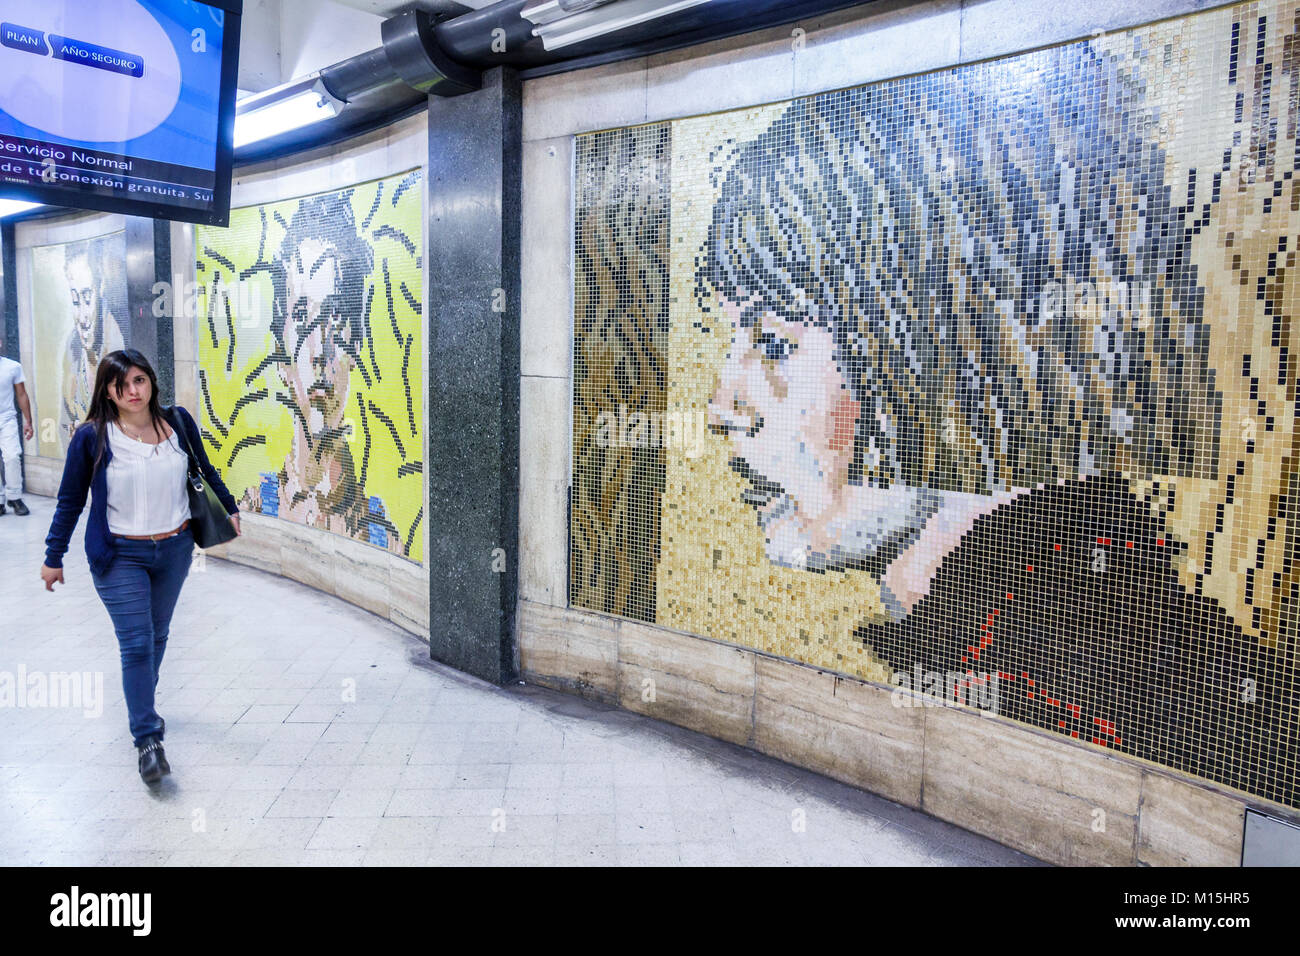 Buenos Aires Argentina,Subte subway public transportation,Callao,station,tile mural,Remo Bianchedi,adult adults woman women female lady,Hispanic Latin Stock Photo